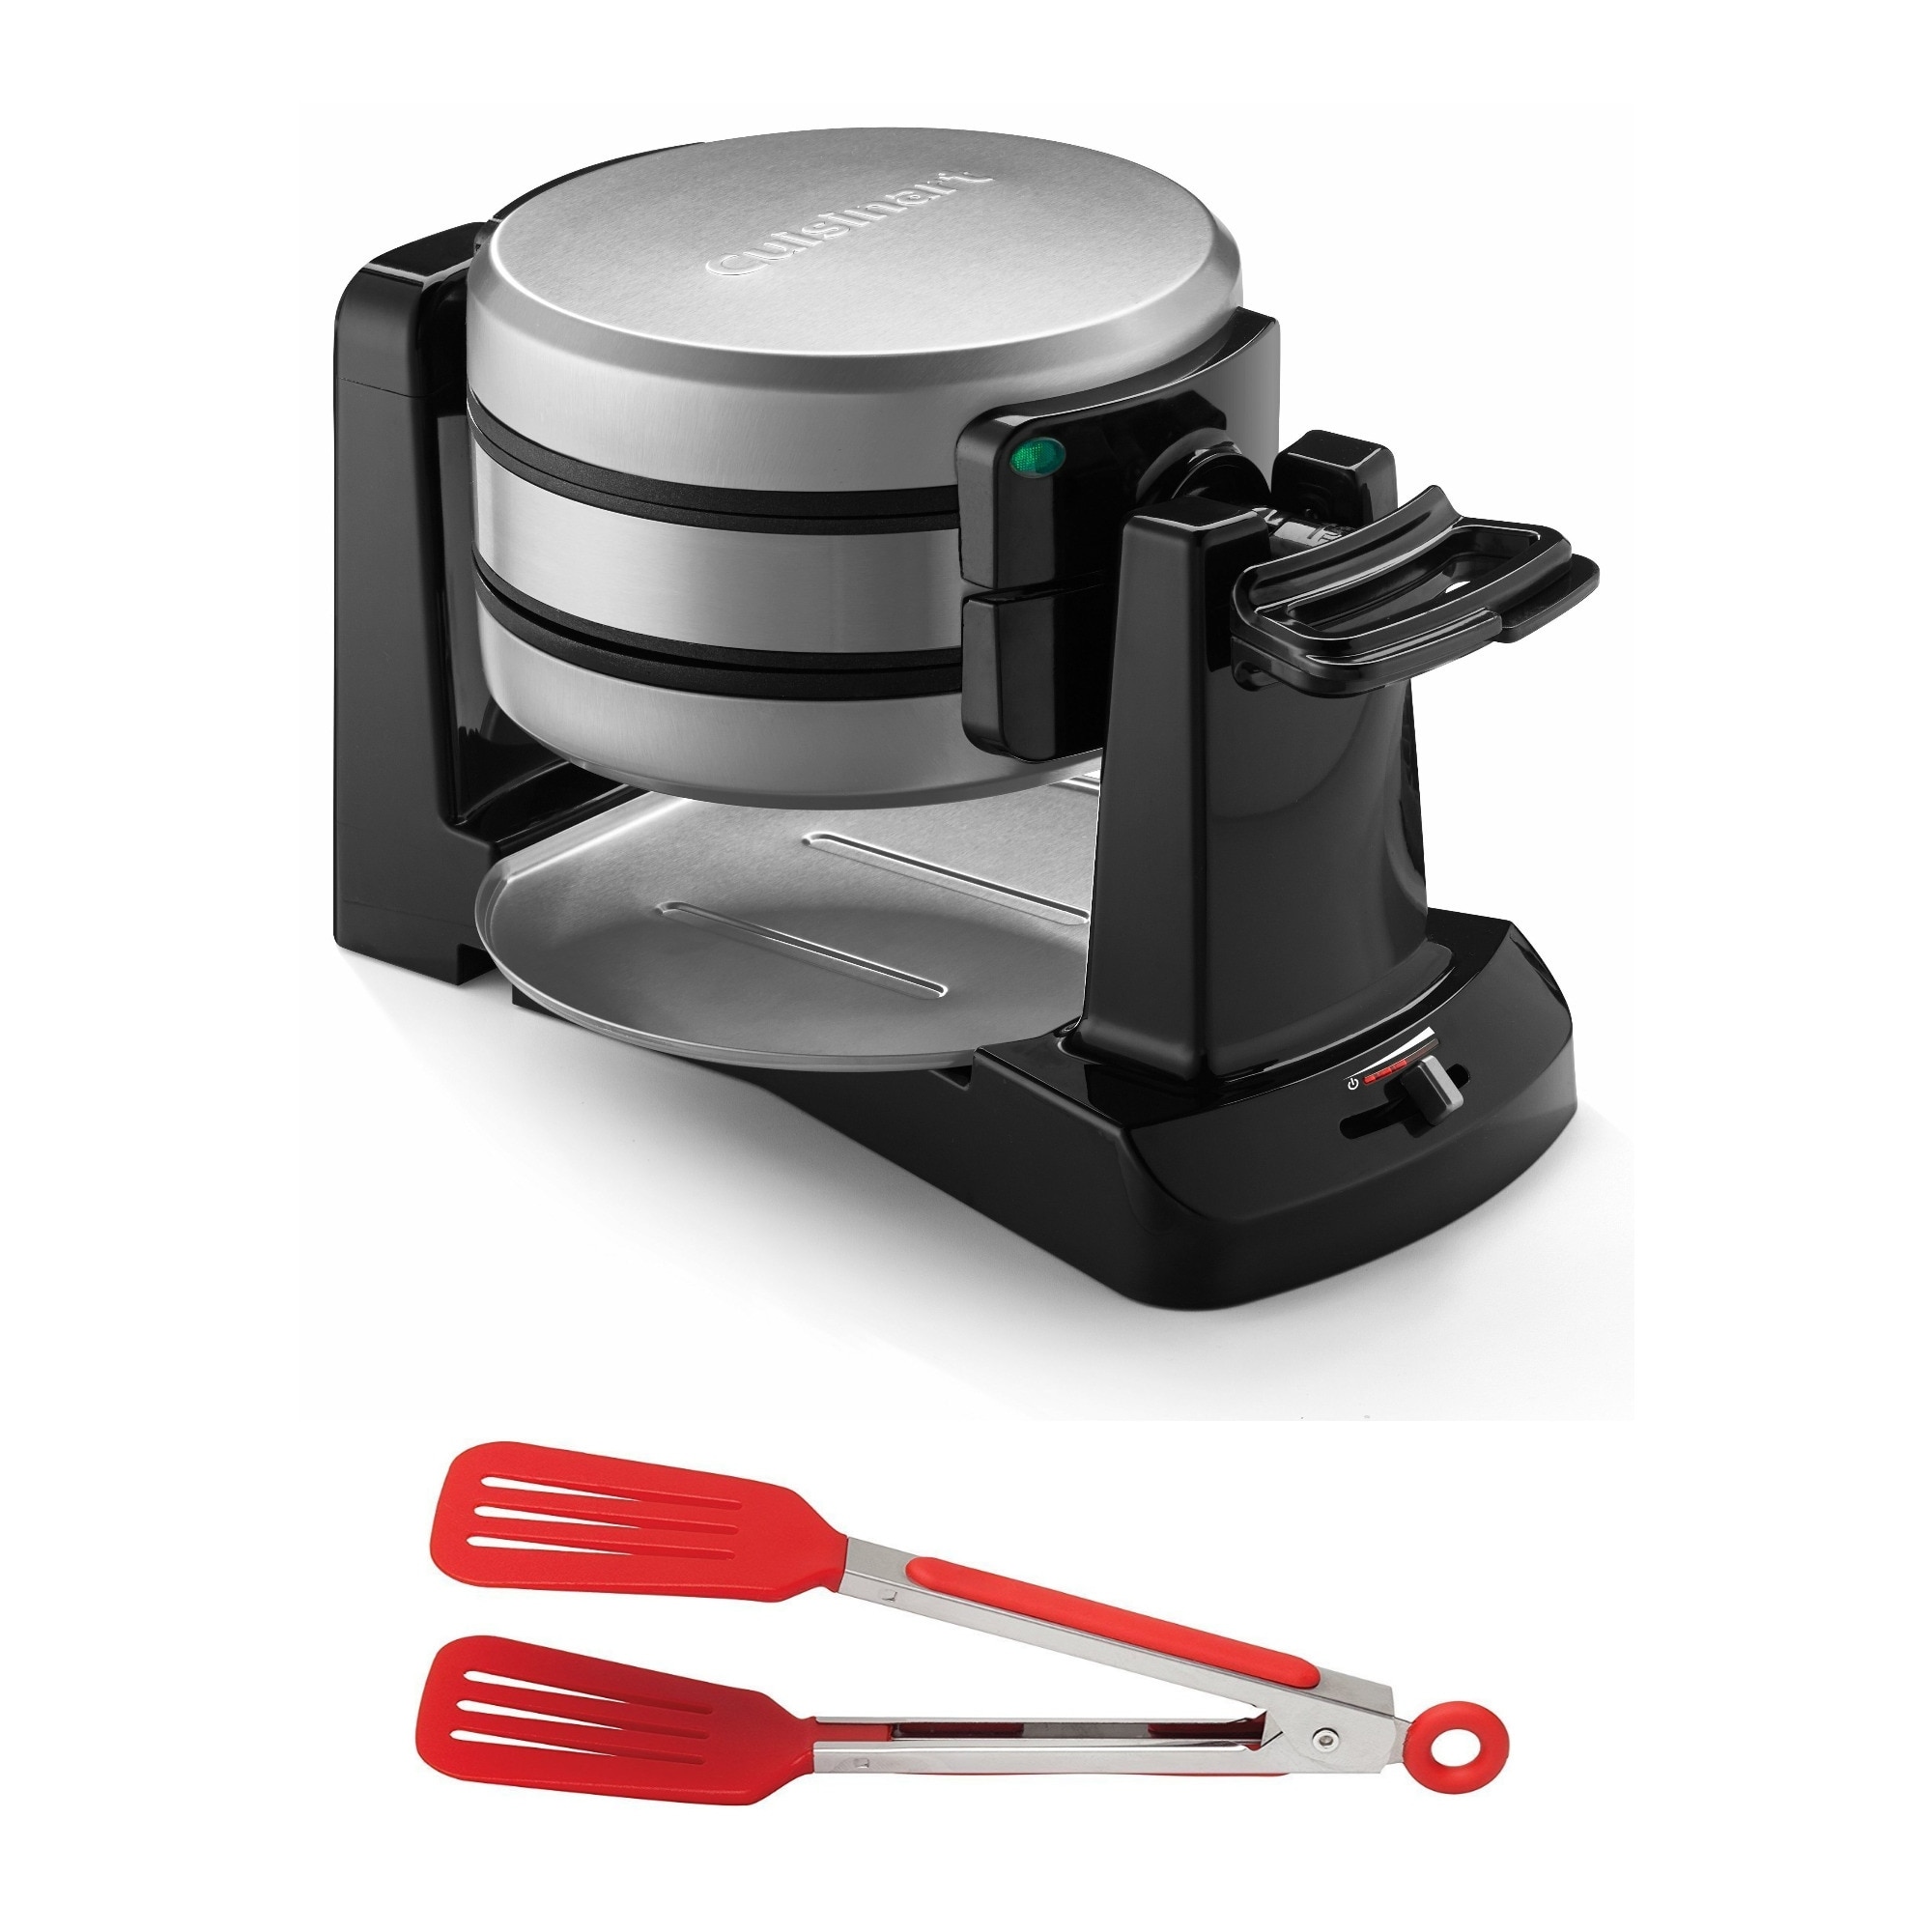 https://ak1.ostkcdn.com/images/products/is/images/direct/00d124addefa512d4590a9d5ffd3dba9adf41649/Cuisinart-Double-Flip-Belgian-Waffle-Maker-with-8%22-Nylon-Flipper-Tongs.jpg